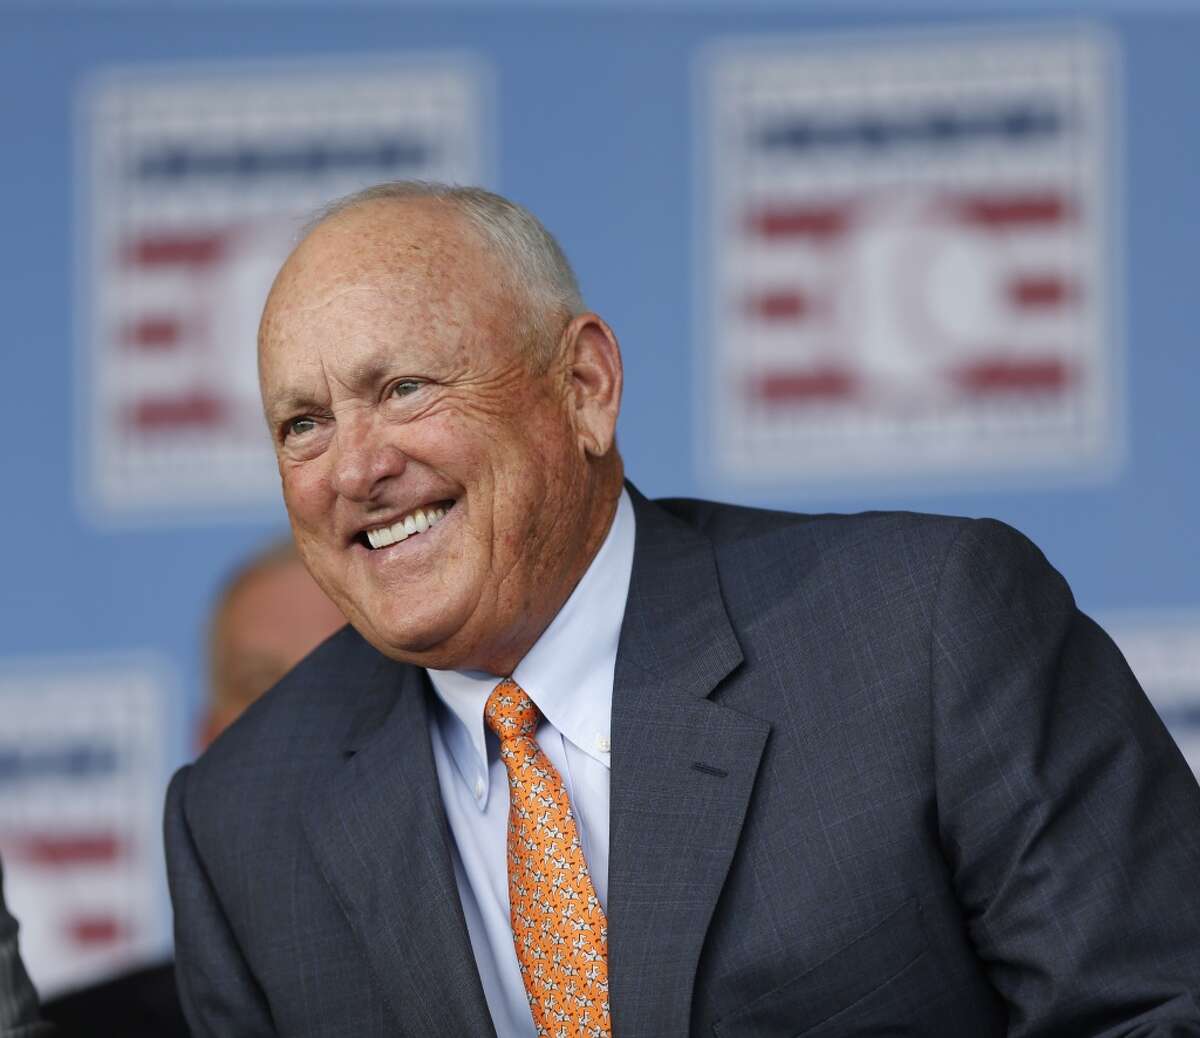 Nolan Ryan's arrival at Astros camp will be delayed until later this month.